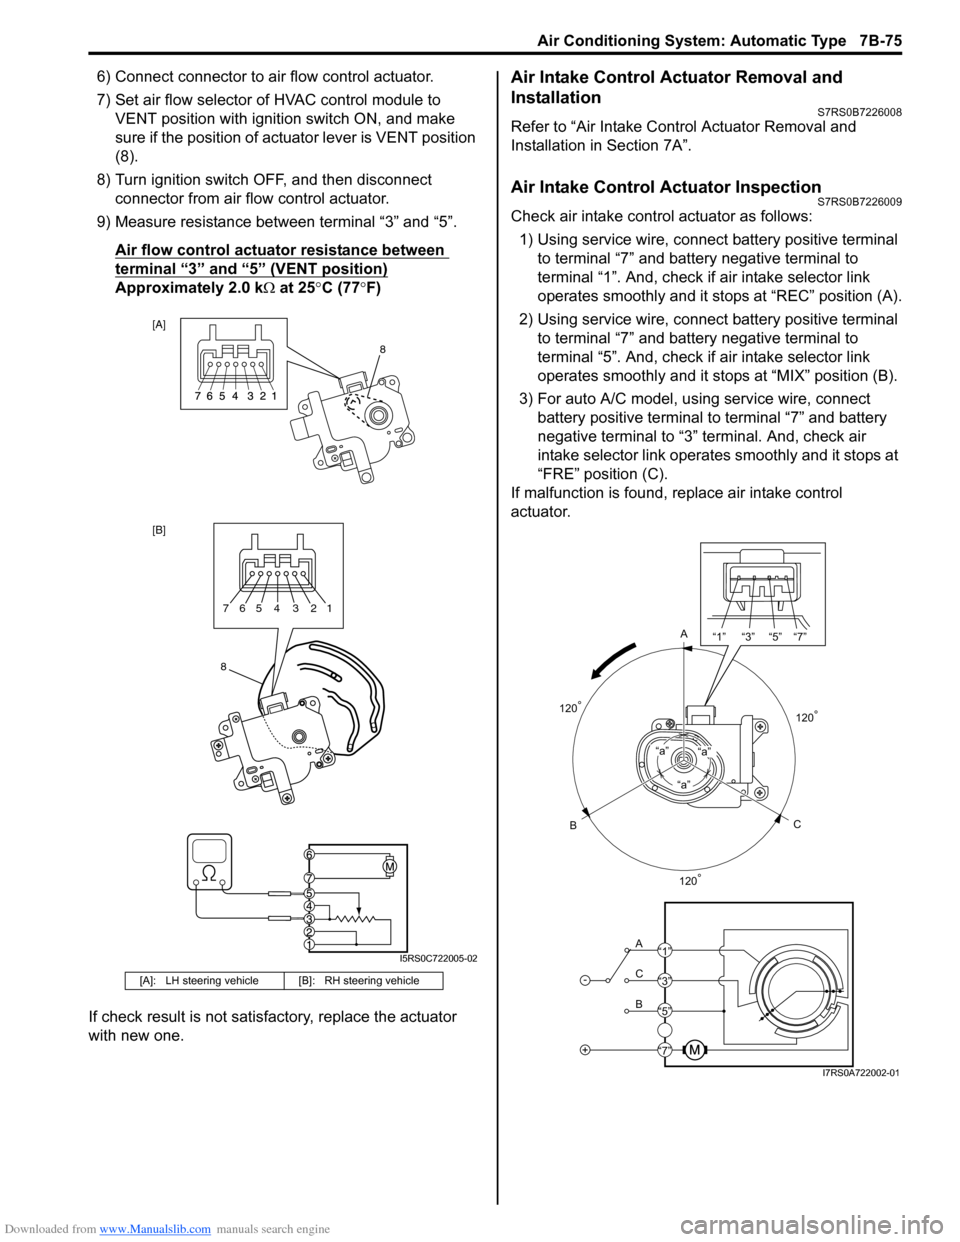 SUZUKI SWIFT 2007 2.G Service Manual Online Downloaded from www.Manualslib.com manuals search engine Air Conditioning System: Automatic Type 7B-75
6) Connect connector to air flow control actuator.
7) Set air flow selector of HVAC control modul